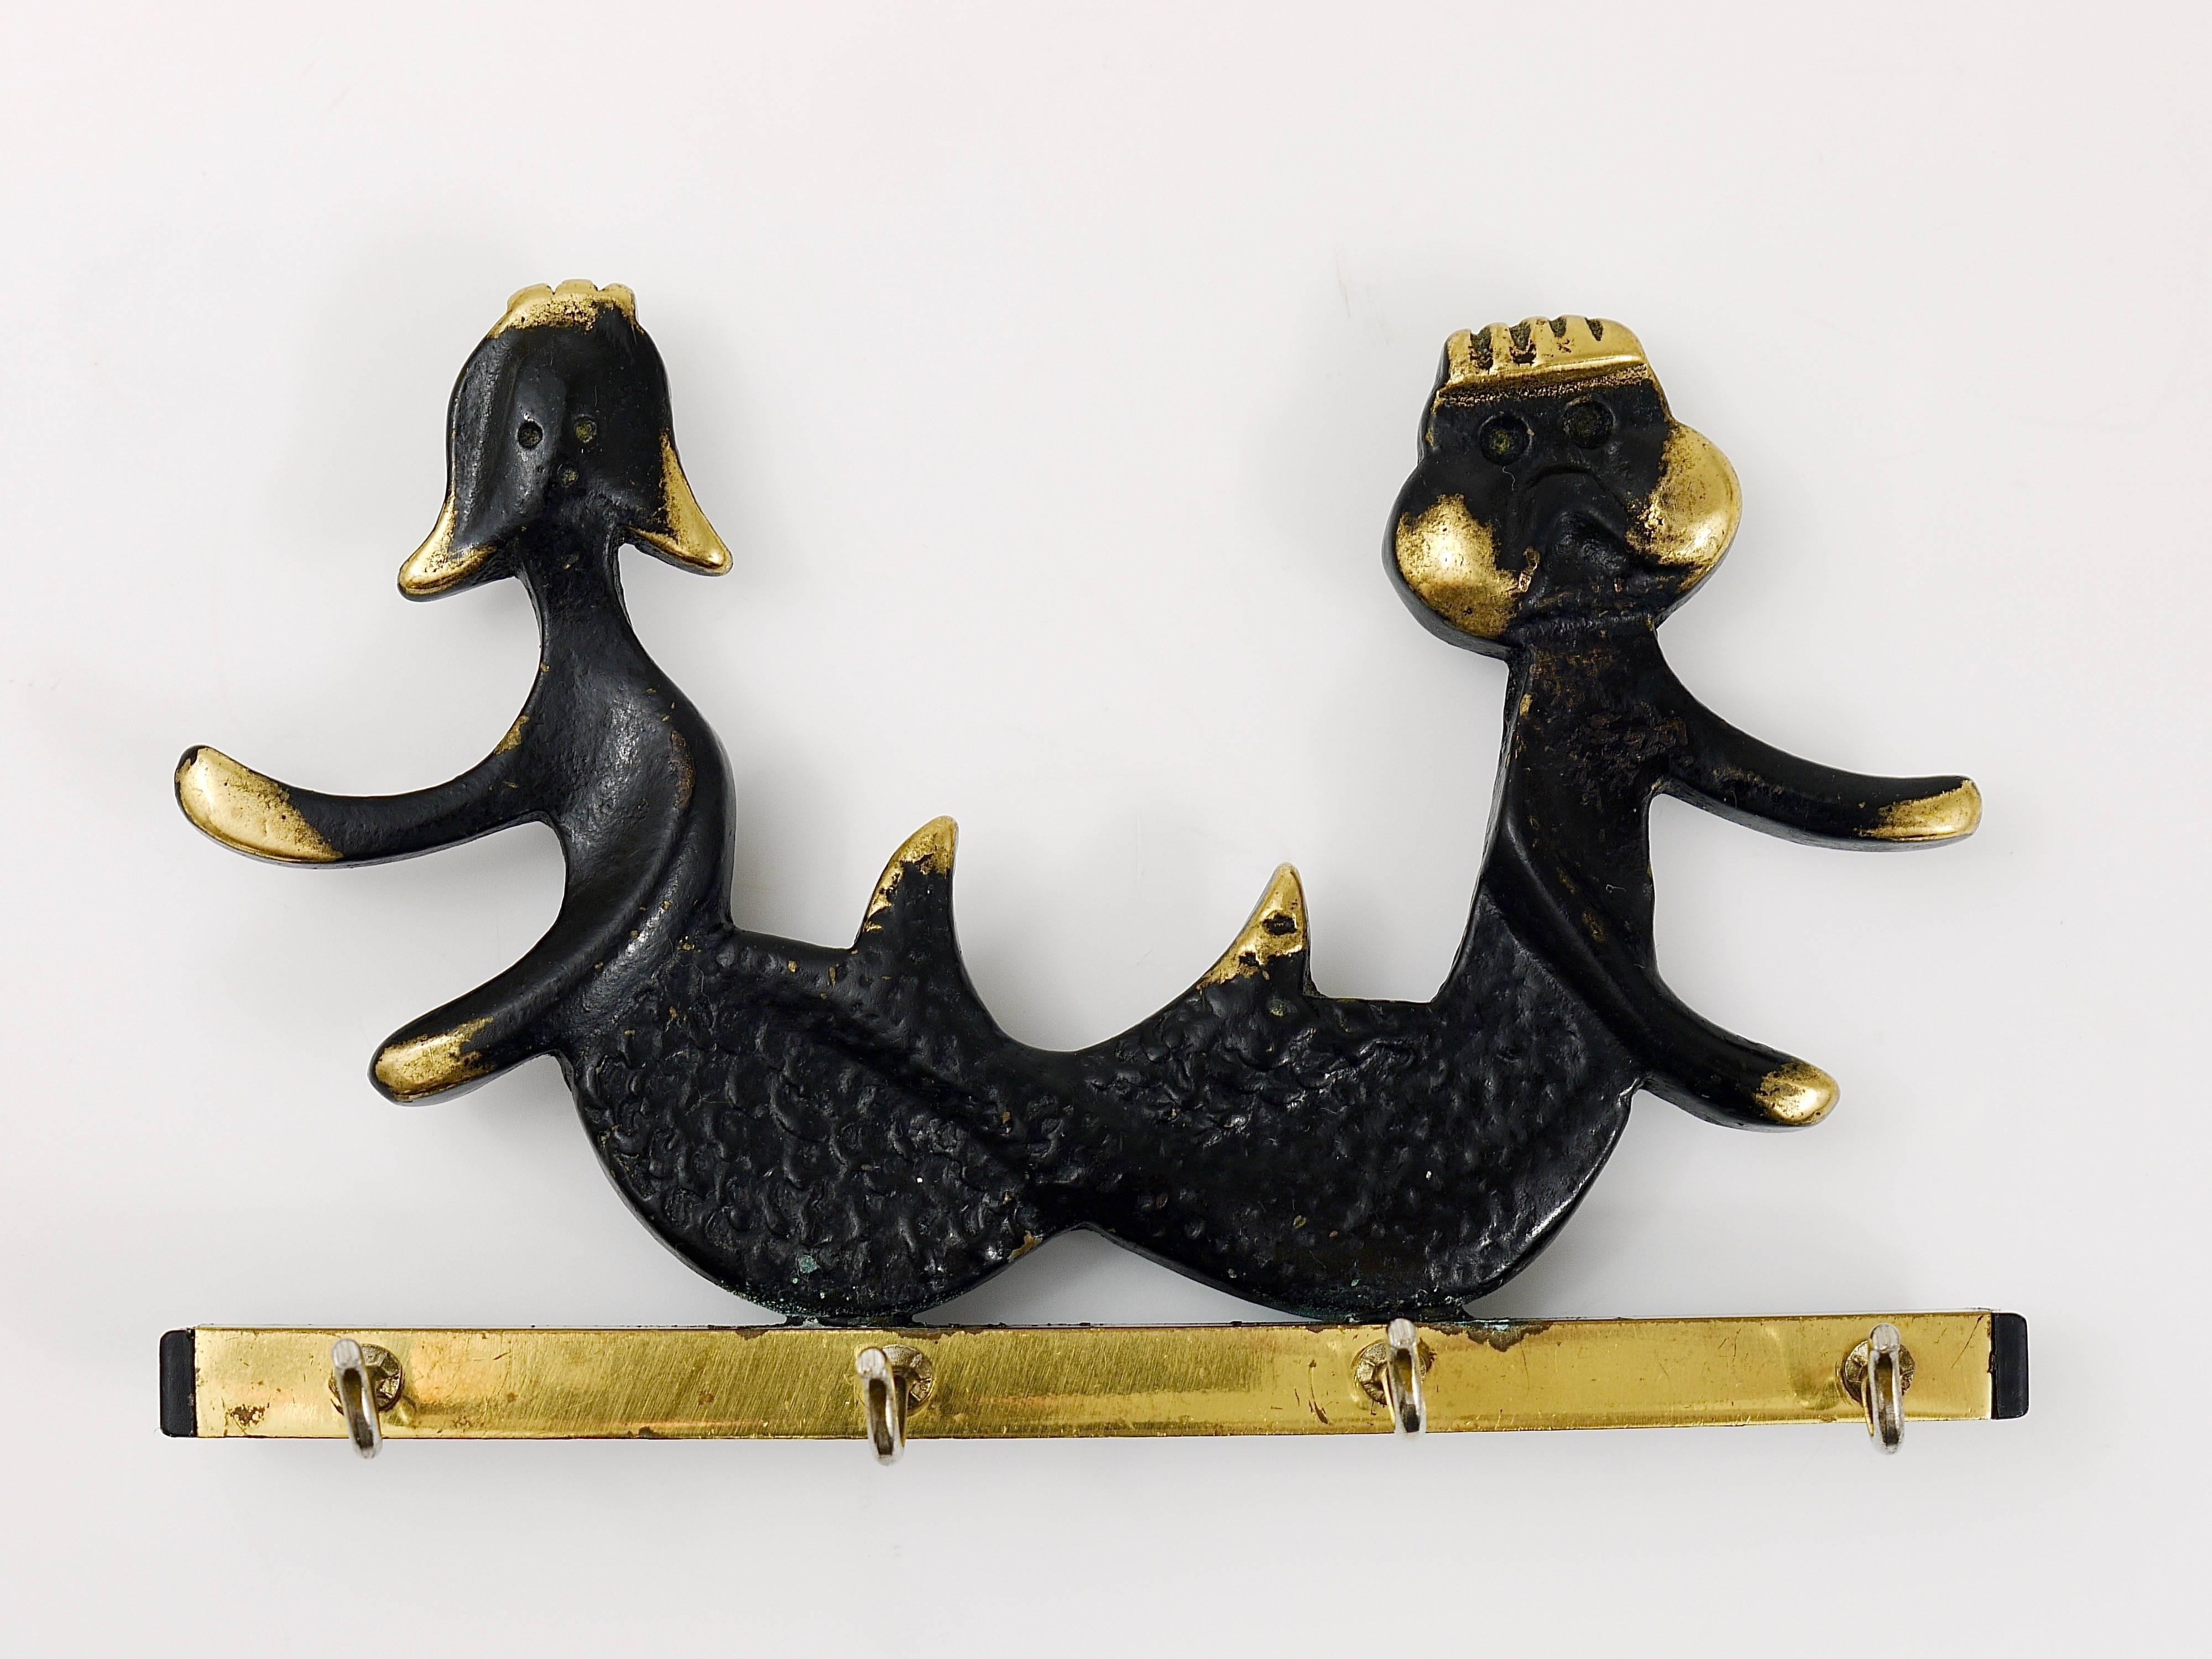 A charming and rare key holder, displaying a sea god and a mermaid. A very humorous design by Walter Bosse, executed by Hertha Baller Austria in the 1950s. Made of brass, in good condition with nice patina. Also suitable as a towel holder or for